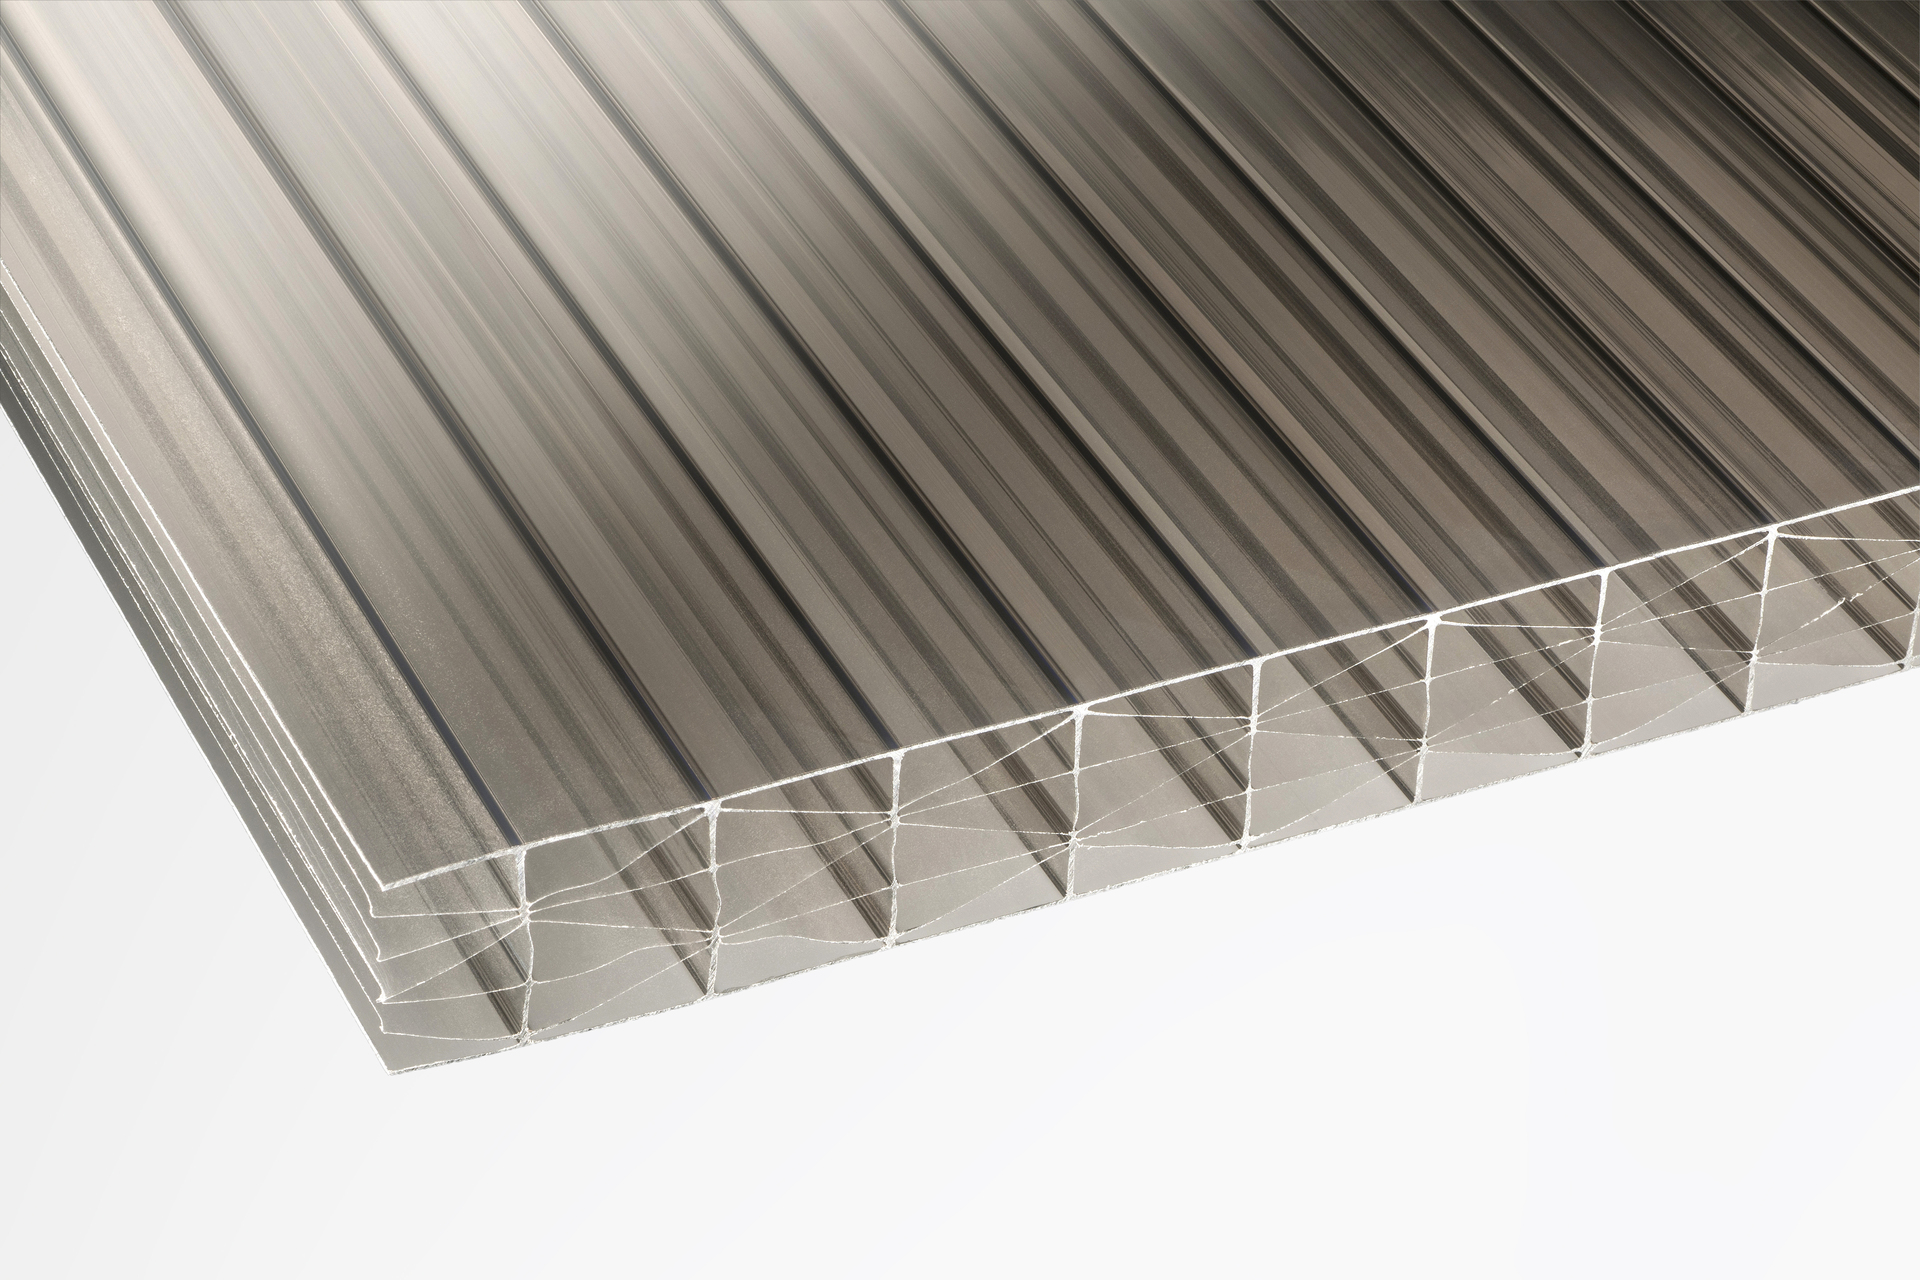 Image of 25mm Bronze Multiwall Polycarbonate Sheet - 3000 x 2100mm